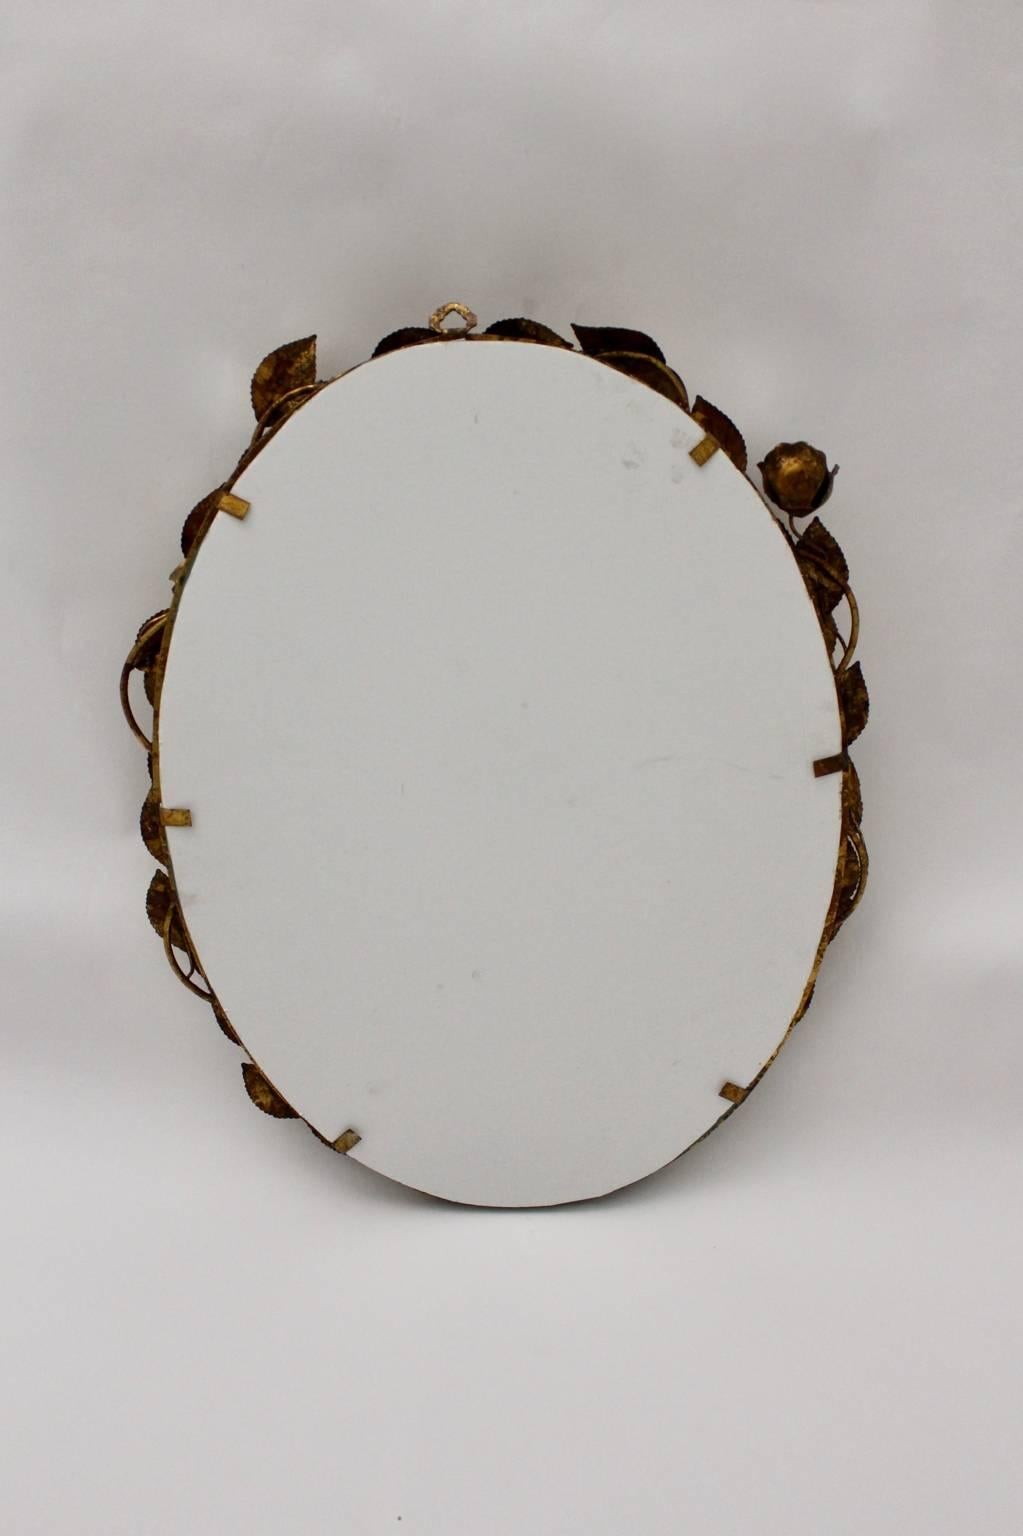  Mid Century Modern Vintage Gold Metal Oval Wall Mirror Flowers Roses 1950 Italy For Sale 1